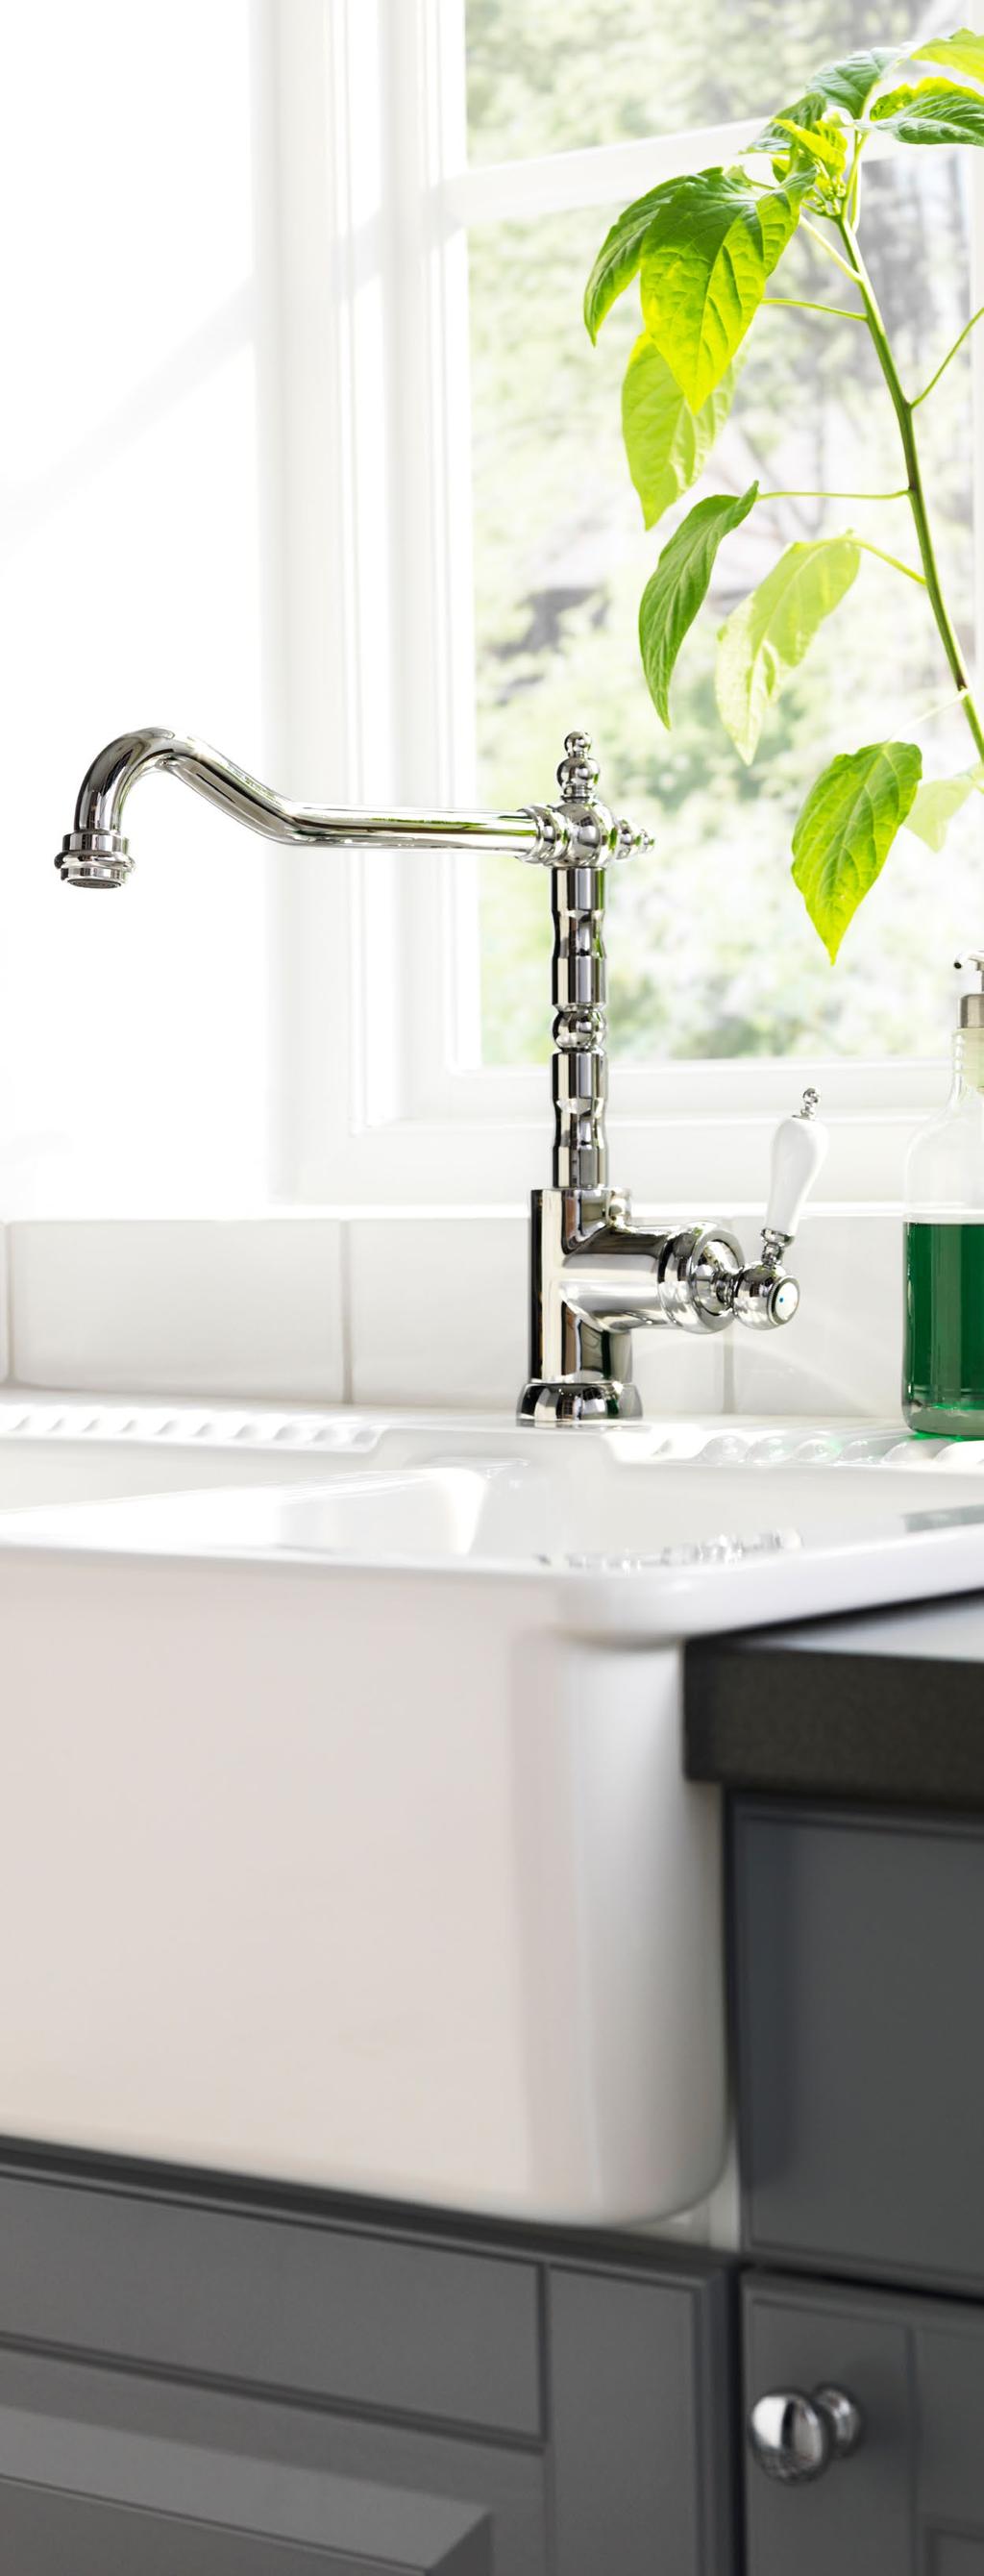 Some of our top mounted sinks can even be ordered as under-glued sinks in a PERSONLIG custom-made worktop.